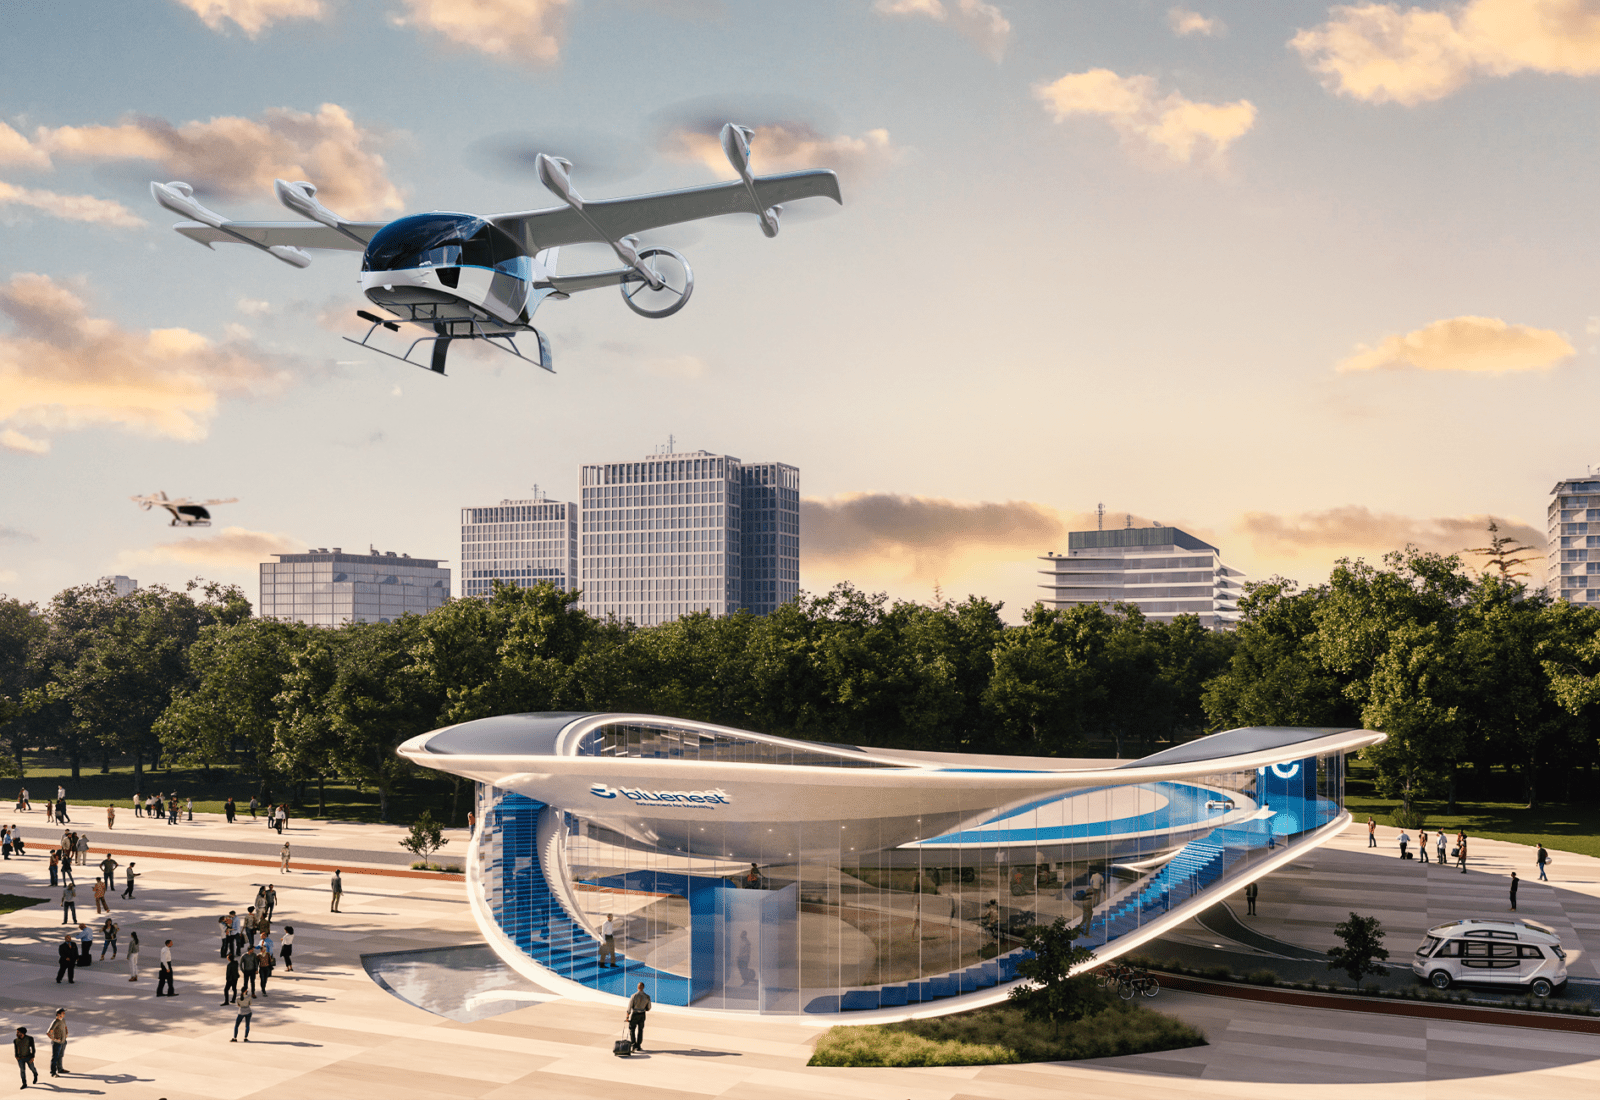 Eve announces Bluenest, by Globalvia, as its first Vertiport operating partner